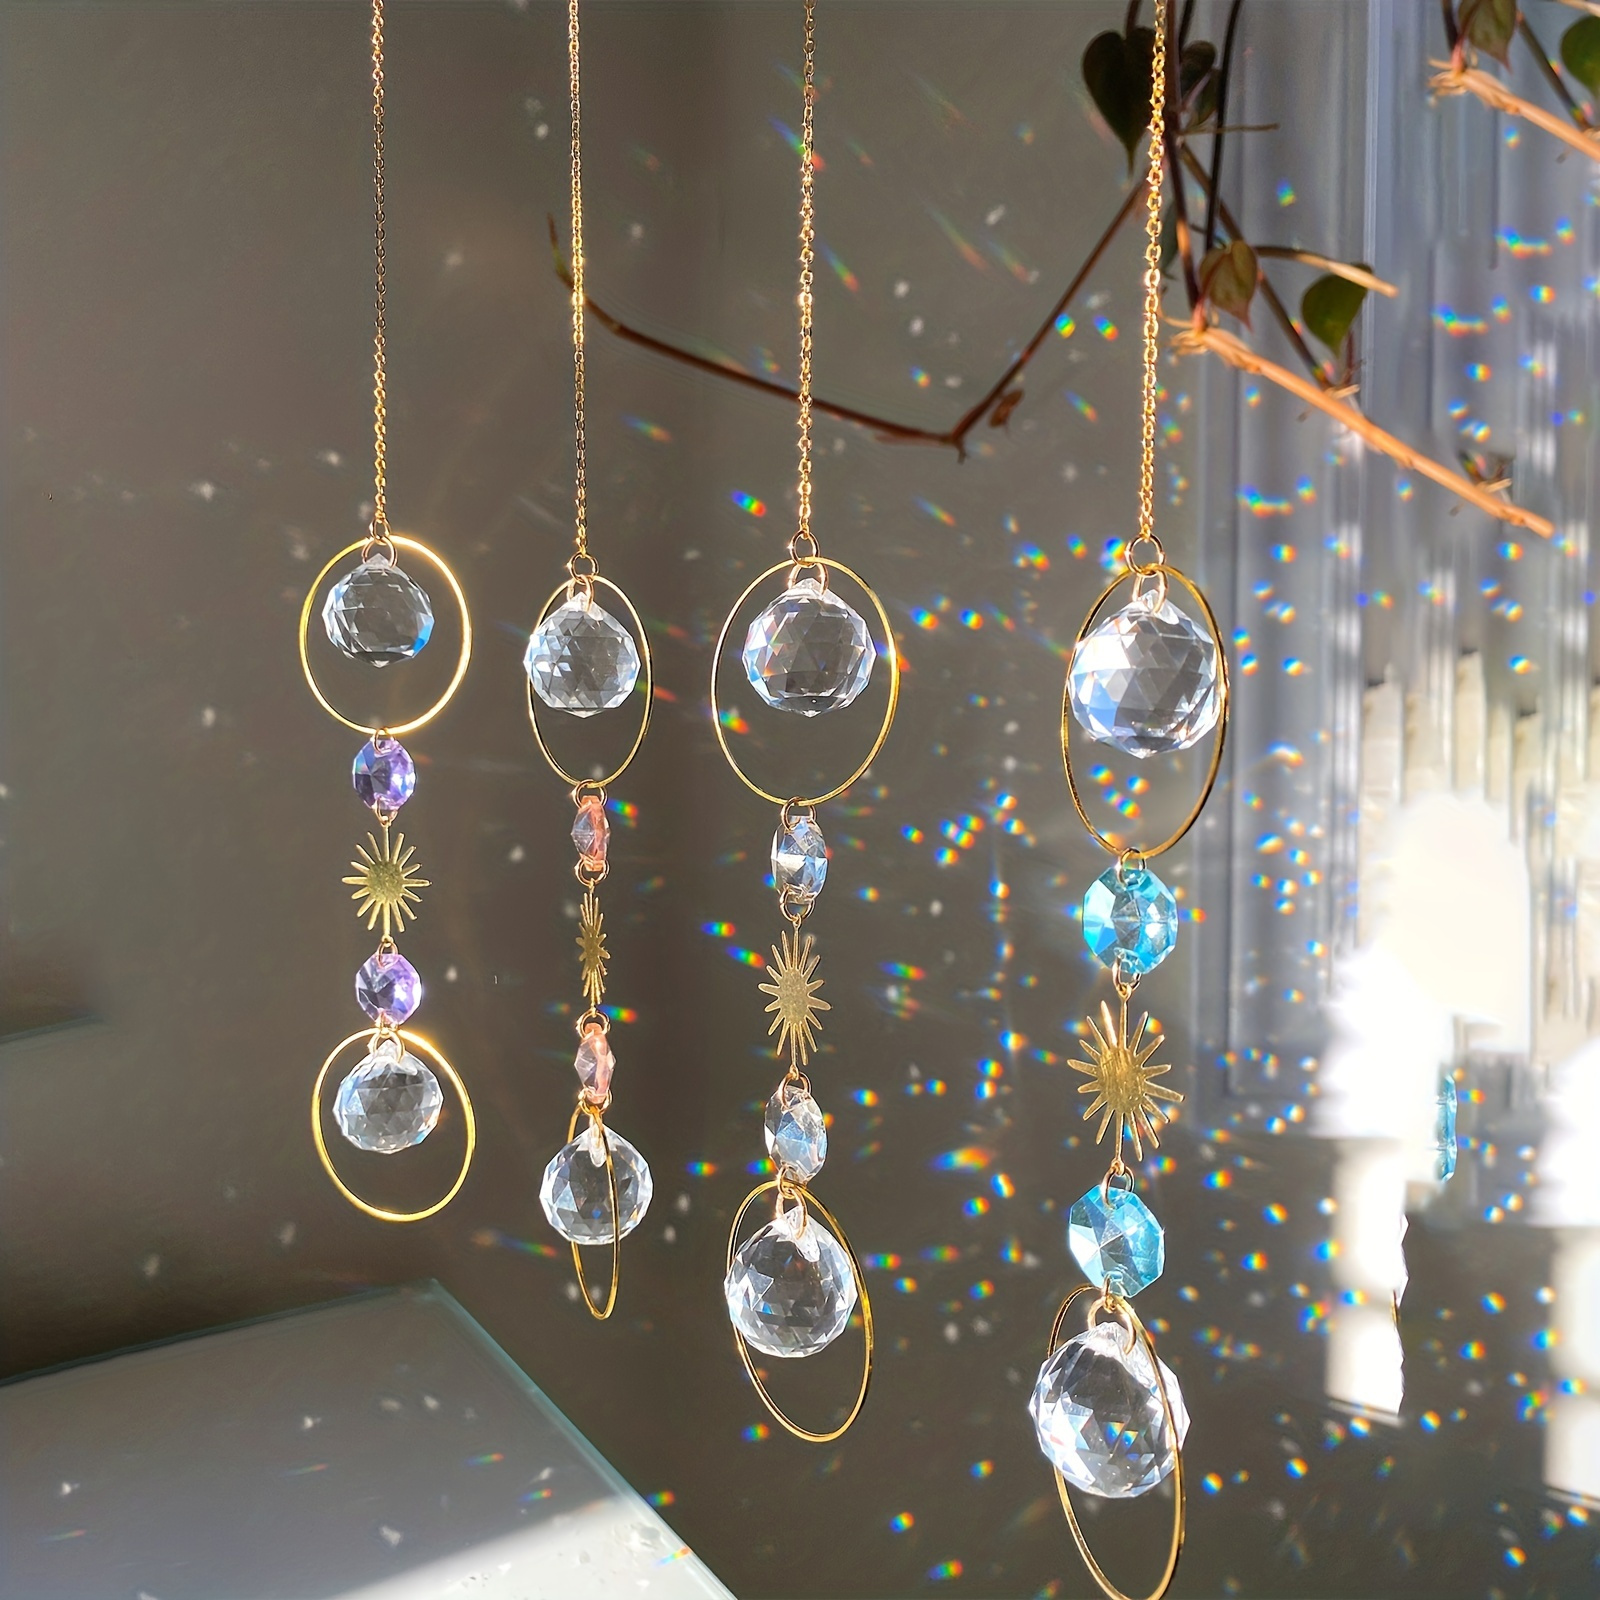 

1pc Crystal Sun Catcher, Wind Chime, Aesthetic Hanging Pendant For Wedding Party Home Decoration Car Hanging Hanging Ornament Suncatcher, Photo Props, Outdoor Decor